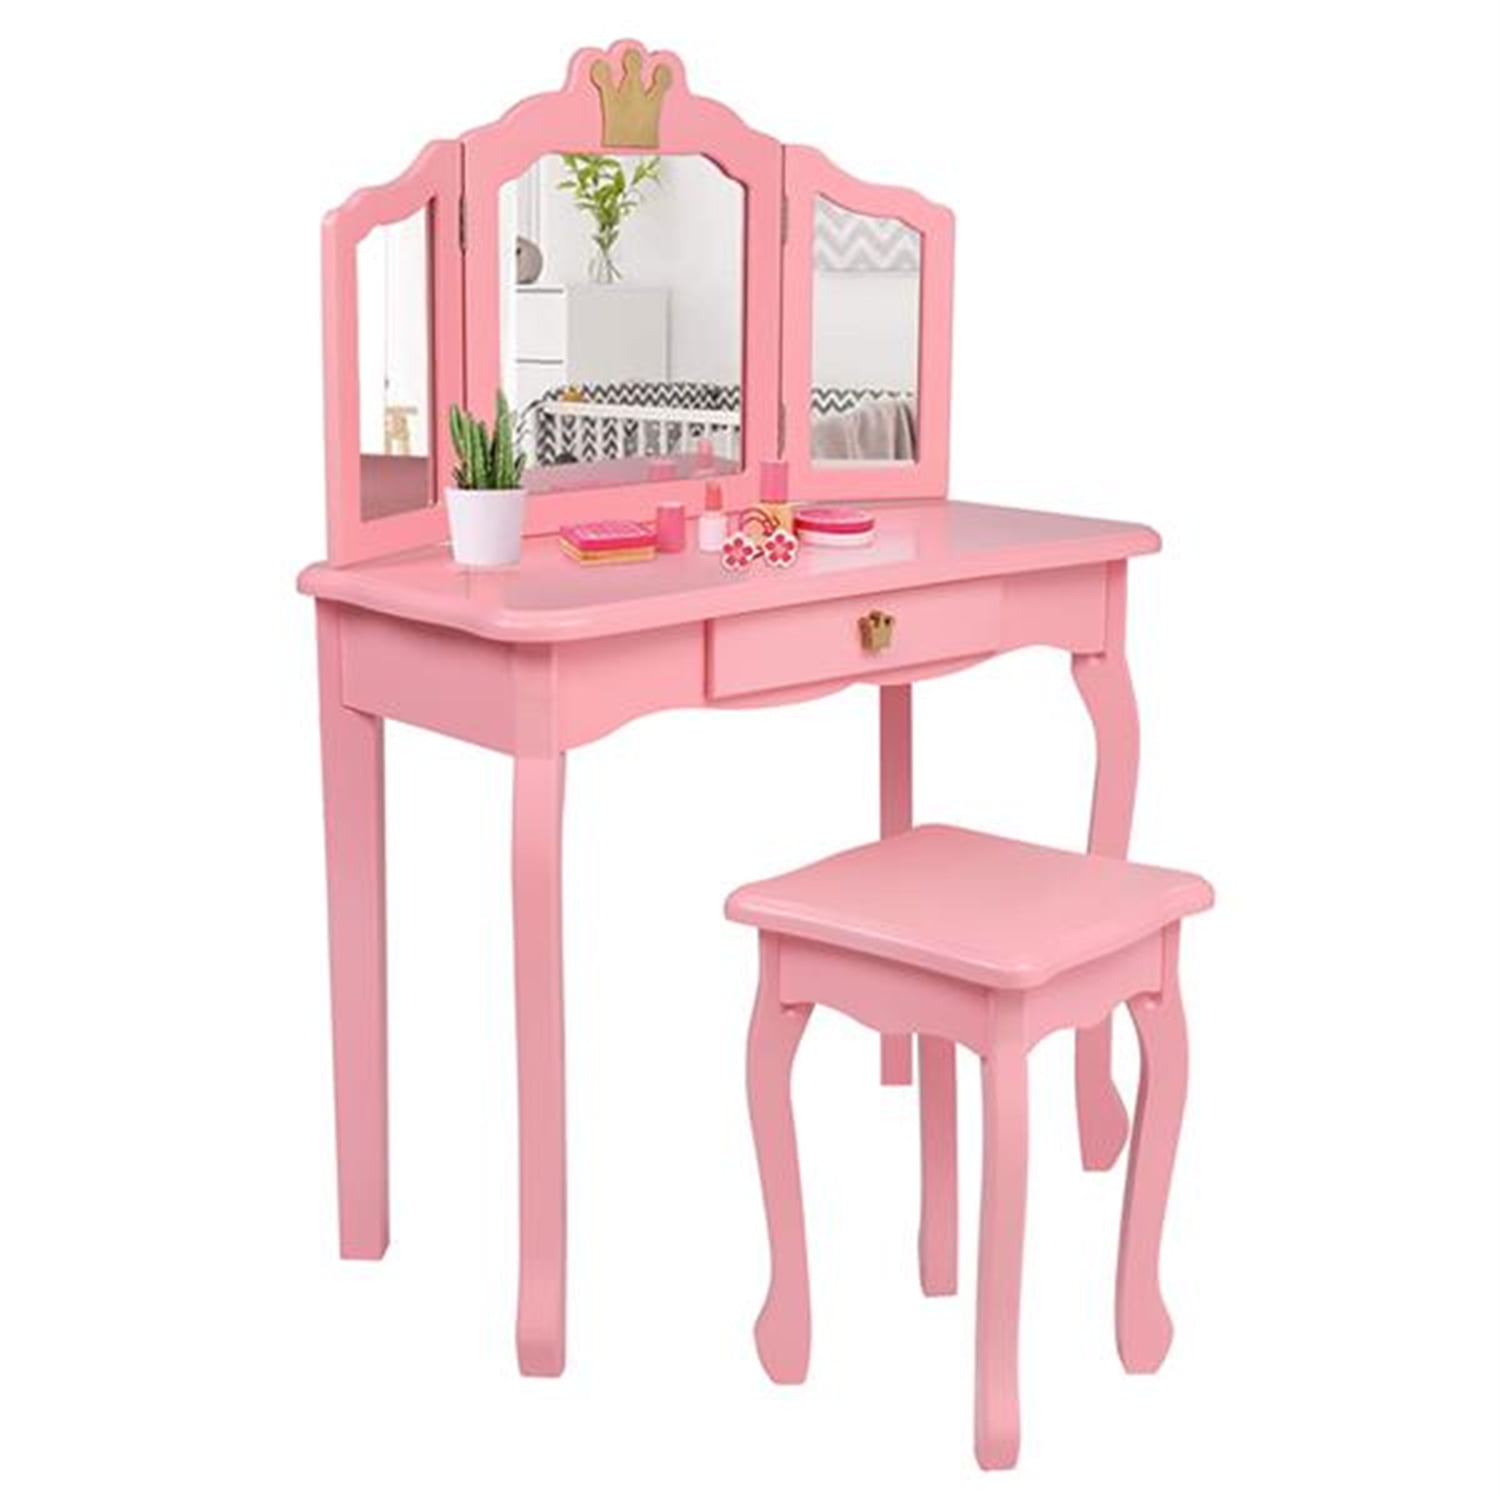 Children's Desk And Stool Natural White Pink Blue MDF Wood With Hinged Lid New 